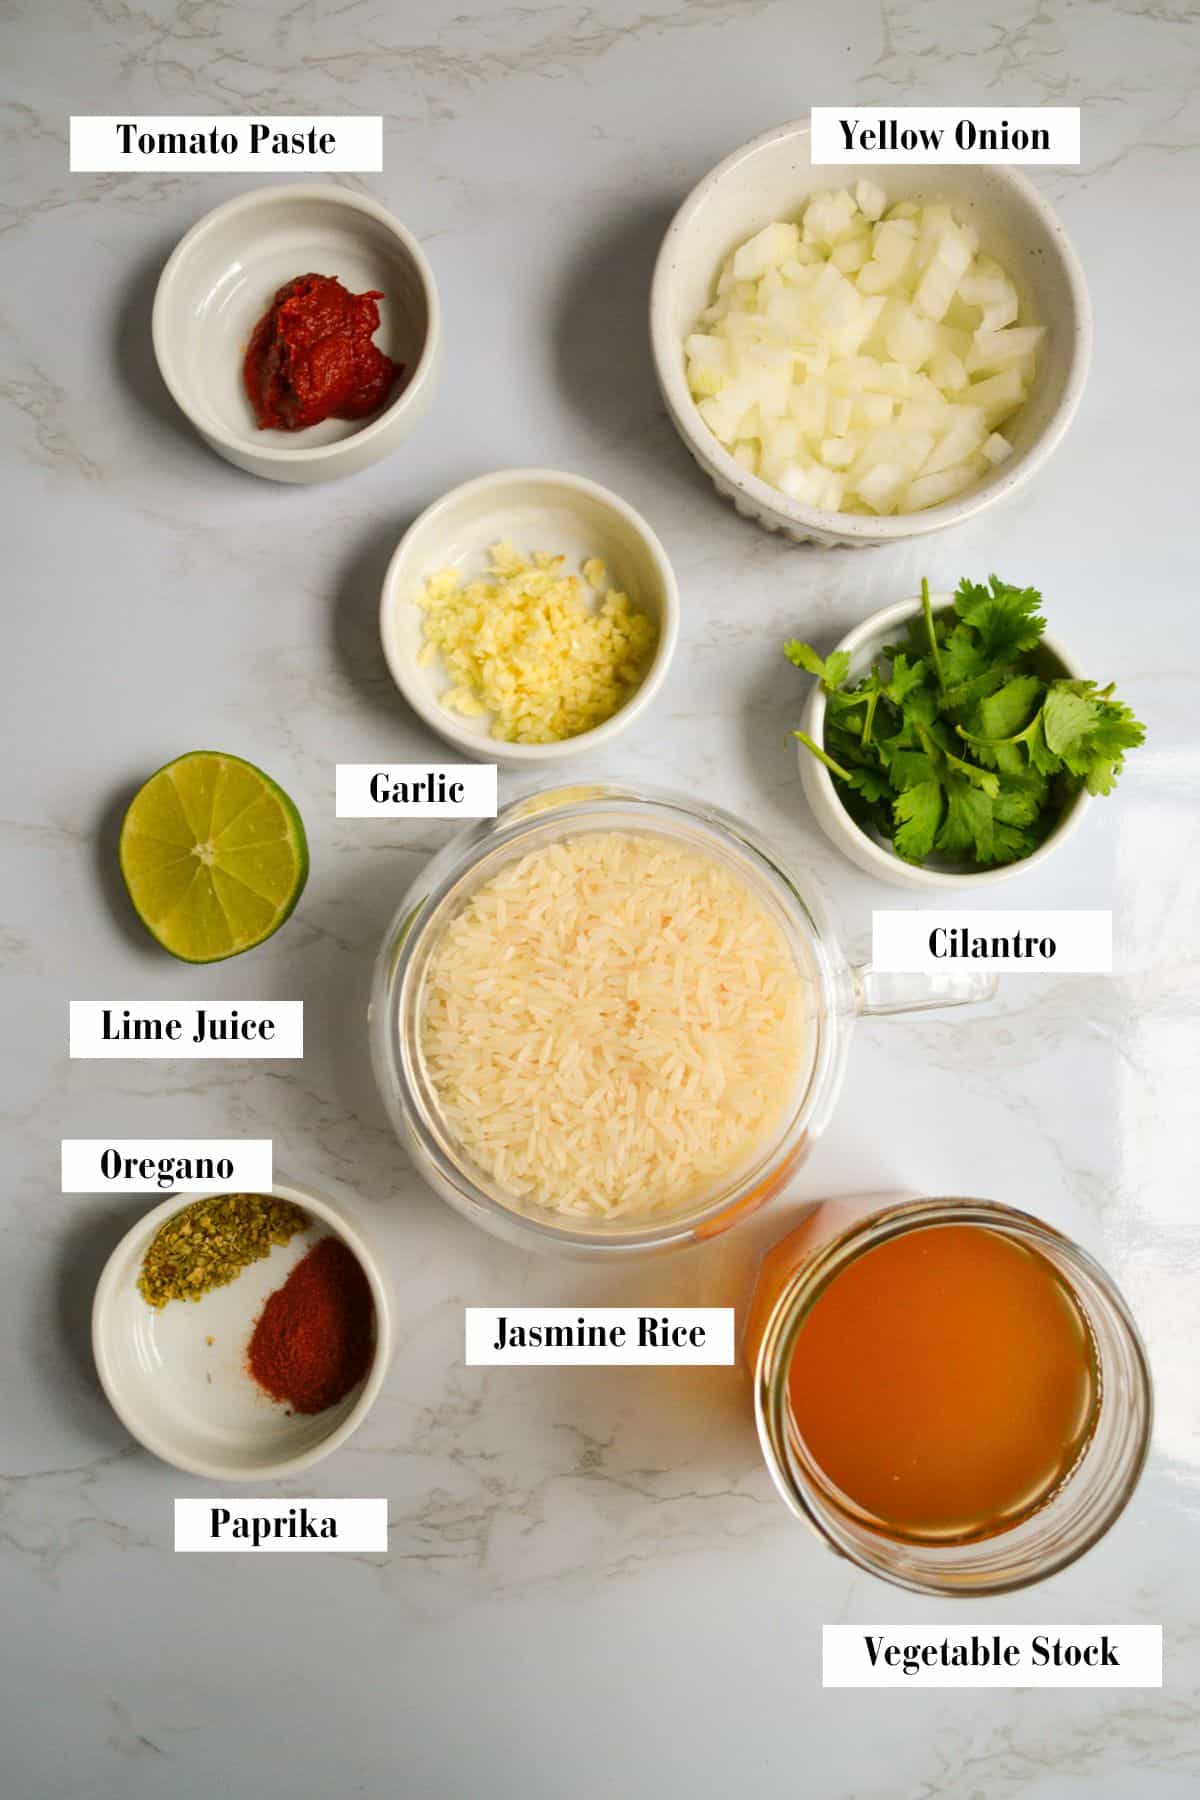 Ingredients for making this recipe in small containers on a marble surface.